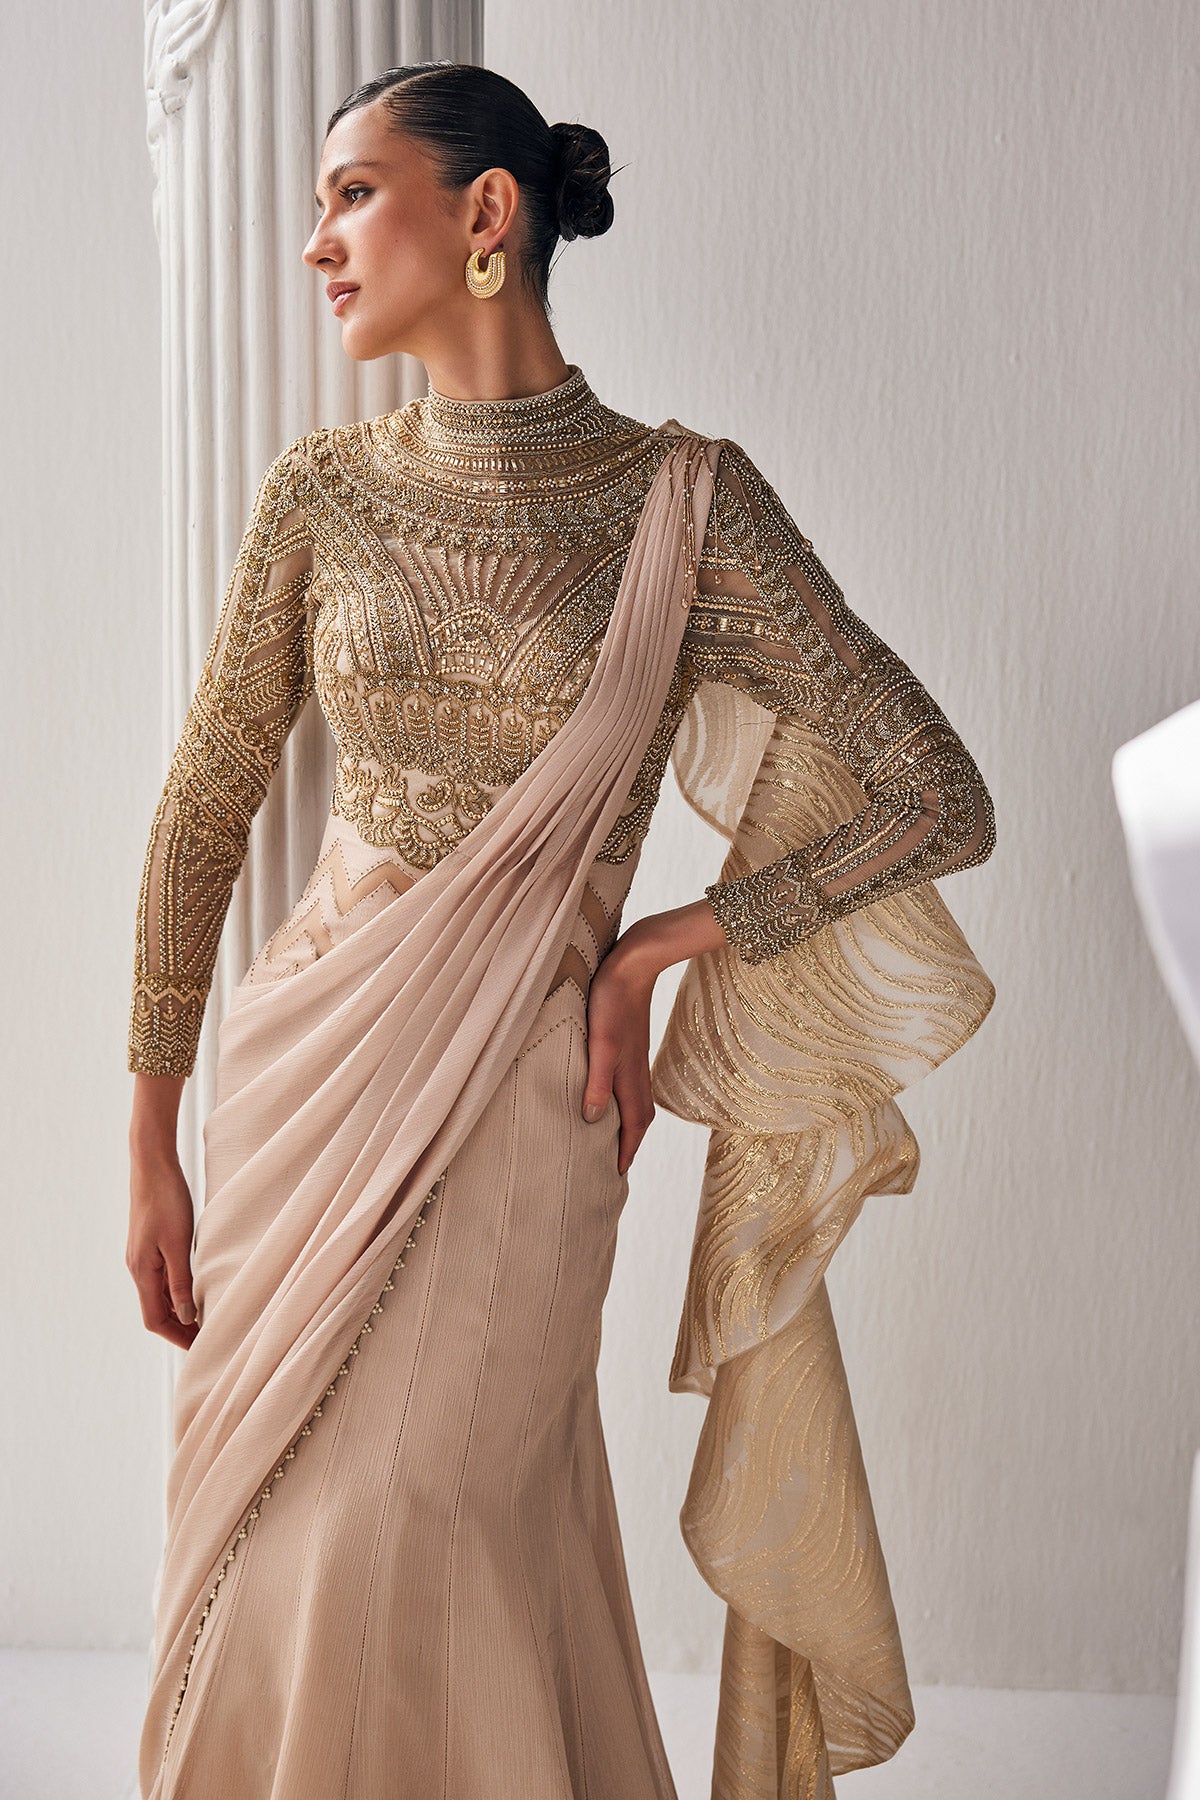 Golden Cream Draped Saree In Luxurious Shimmer Chiffon Offset With A Zardozi Blouse And An Elaborate High Neckline.